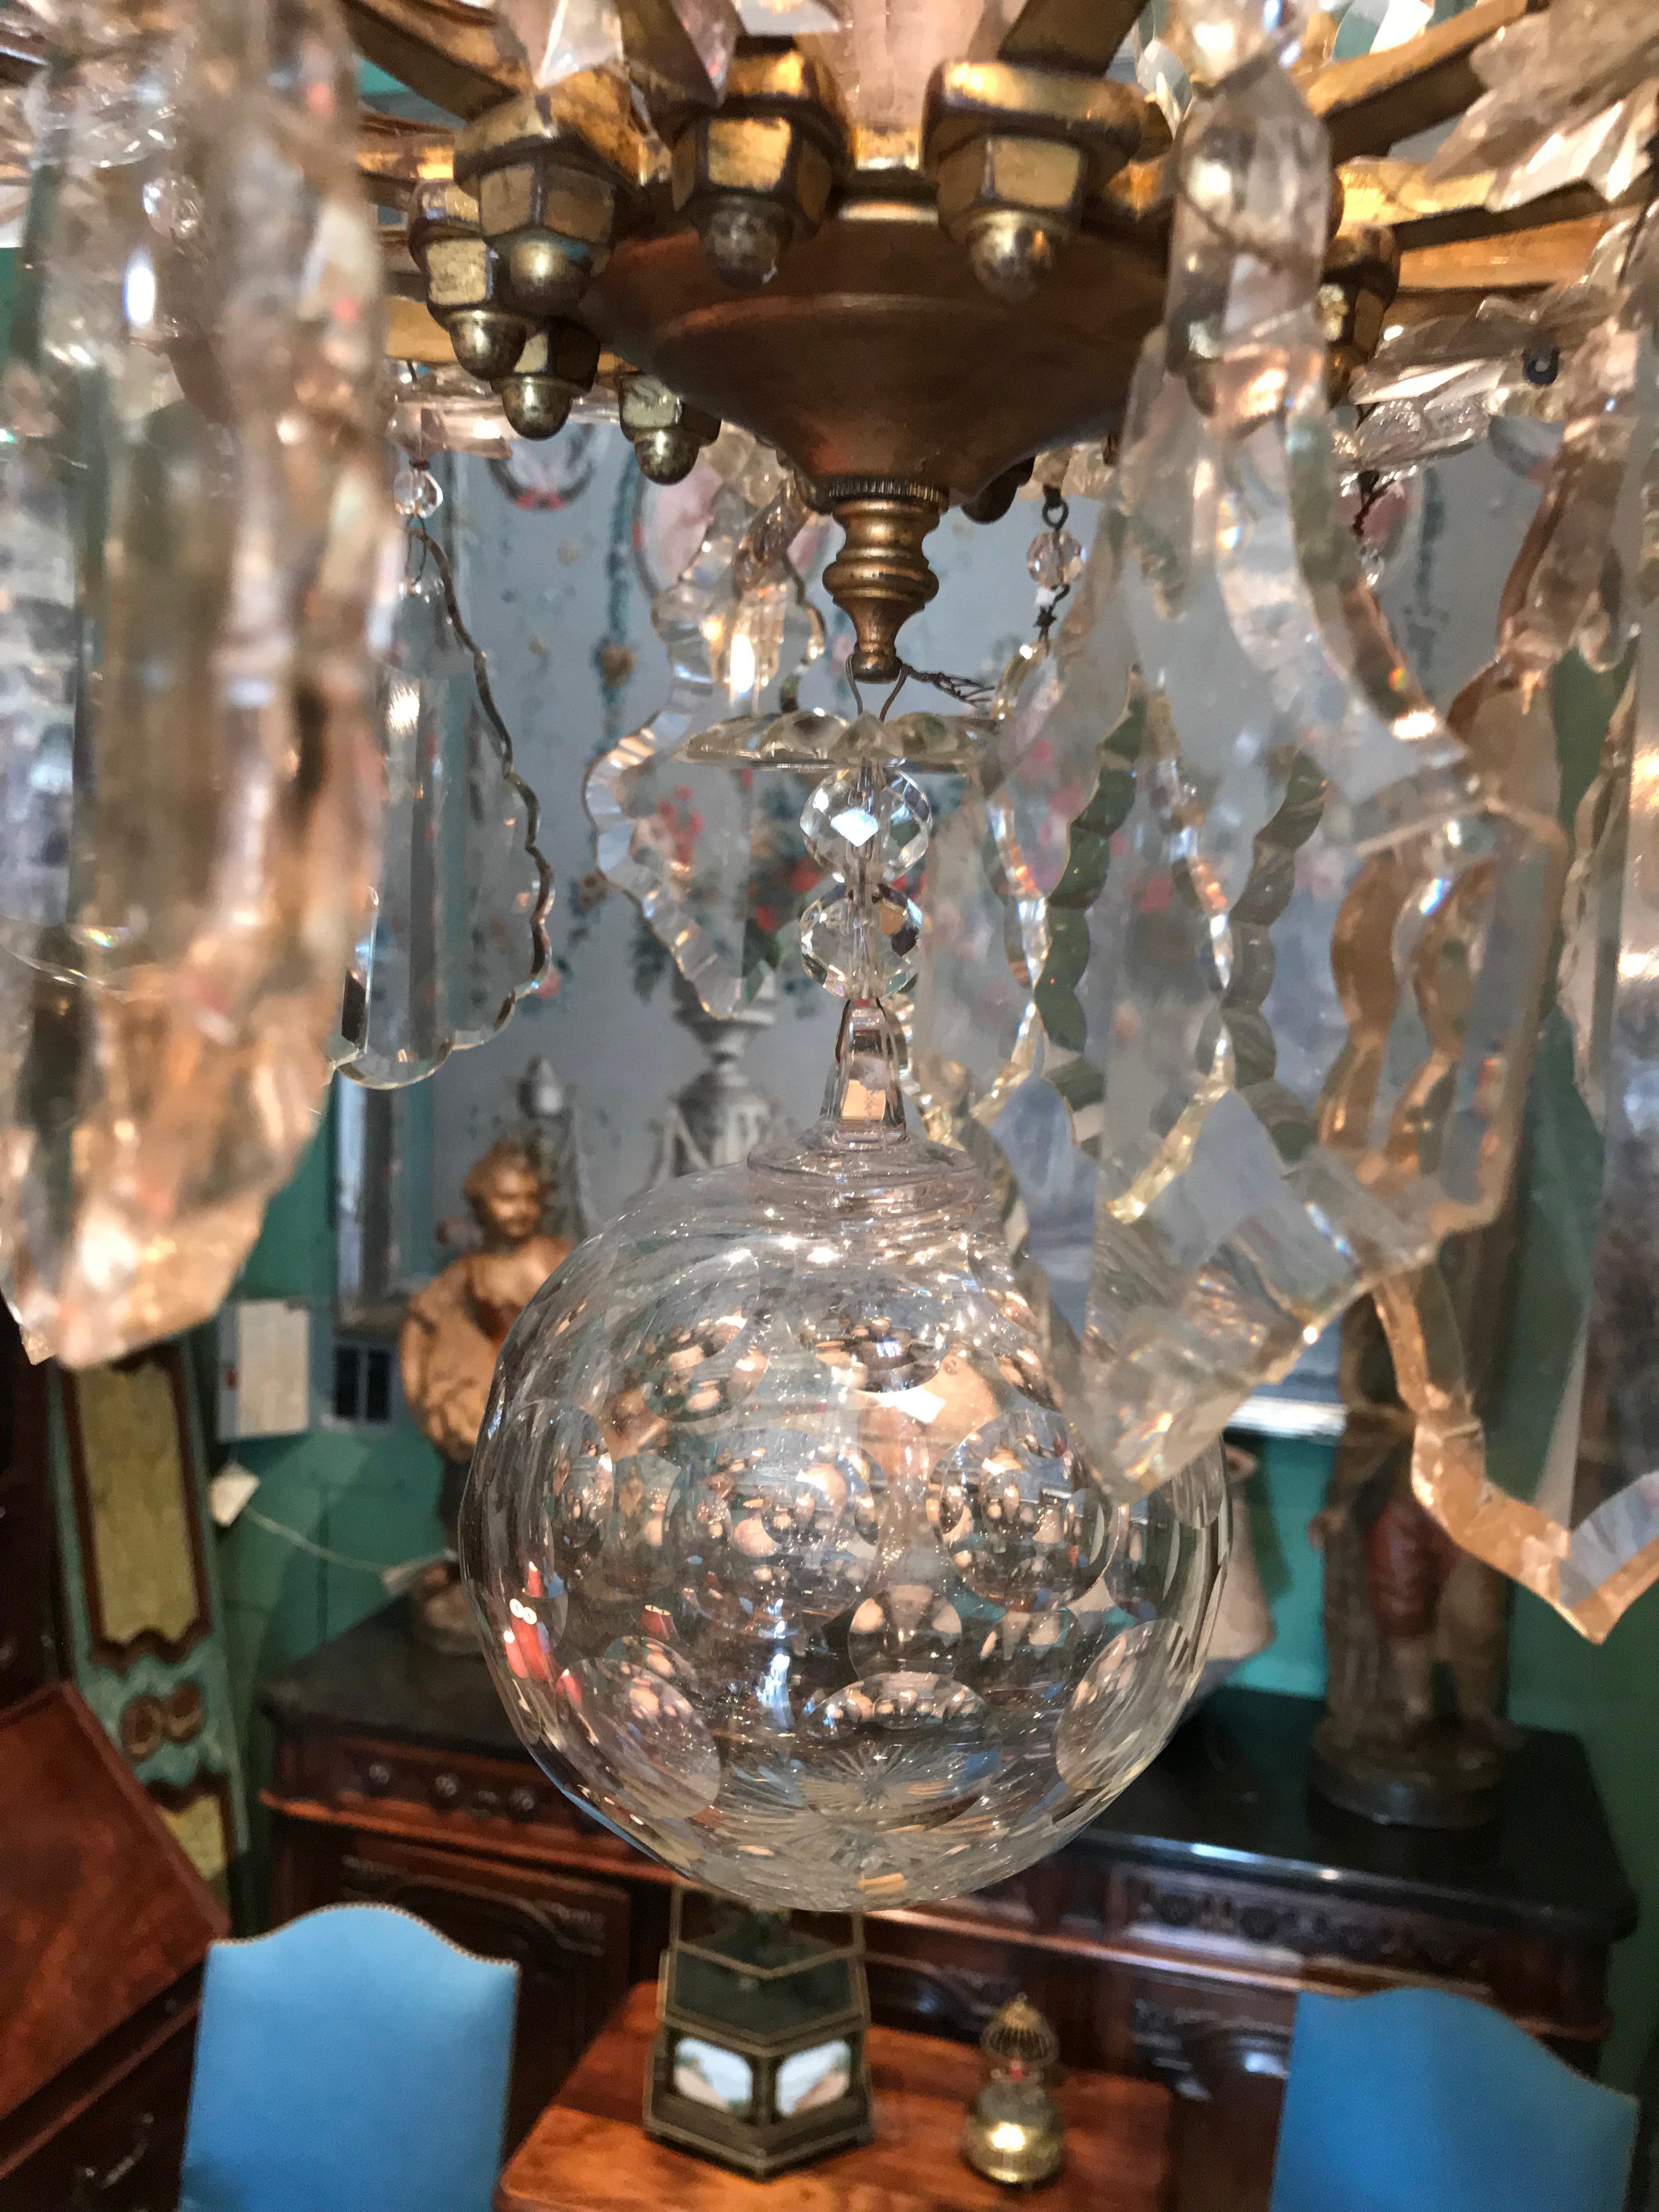 Large Baccarat Crystal Chandelier Dining Entry Ceiling 12 Light Fixture Pendant In Good Condition For Sale In West Hollywood, CA